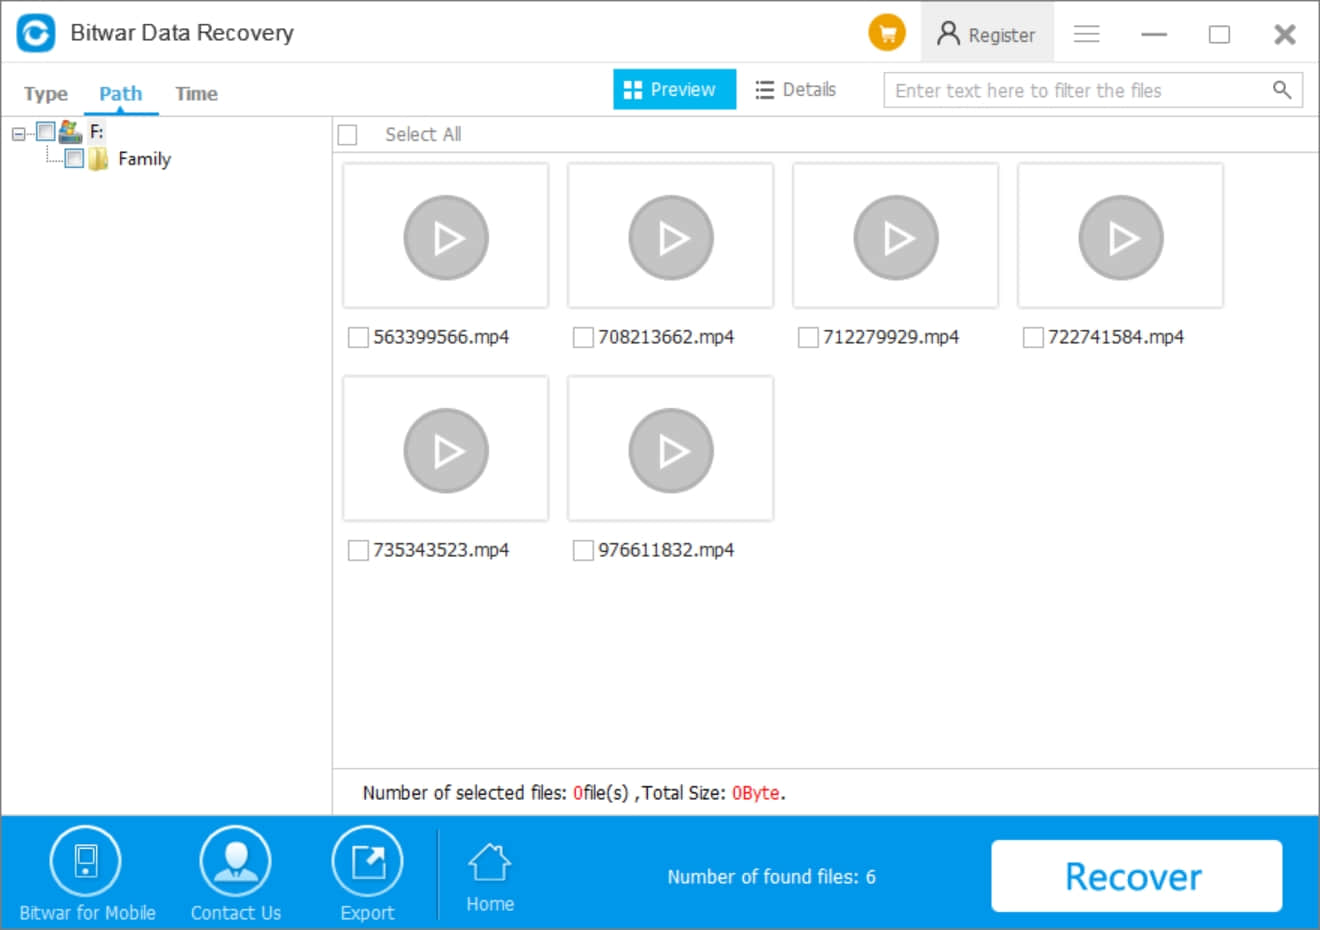 Videos recovery - preview the videos